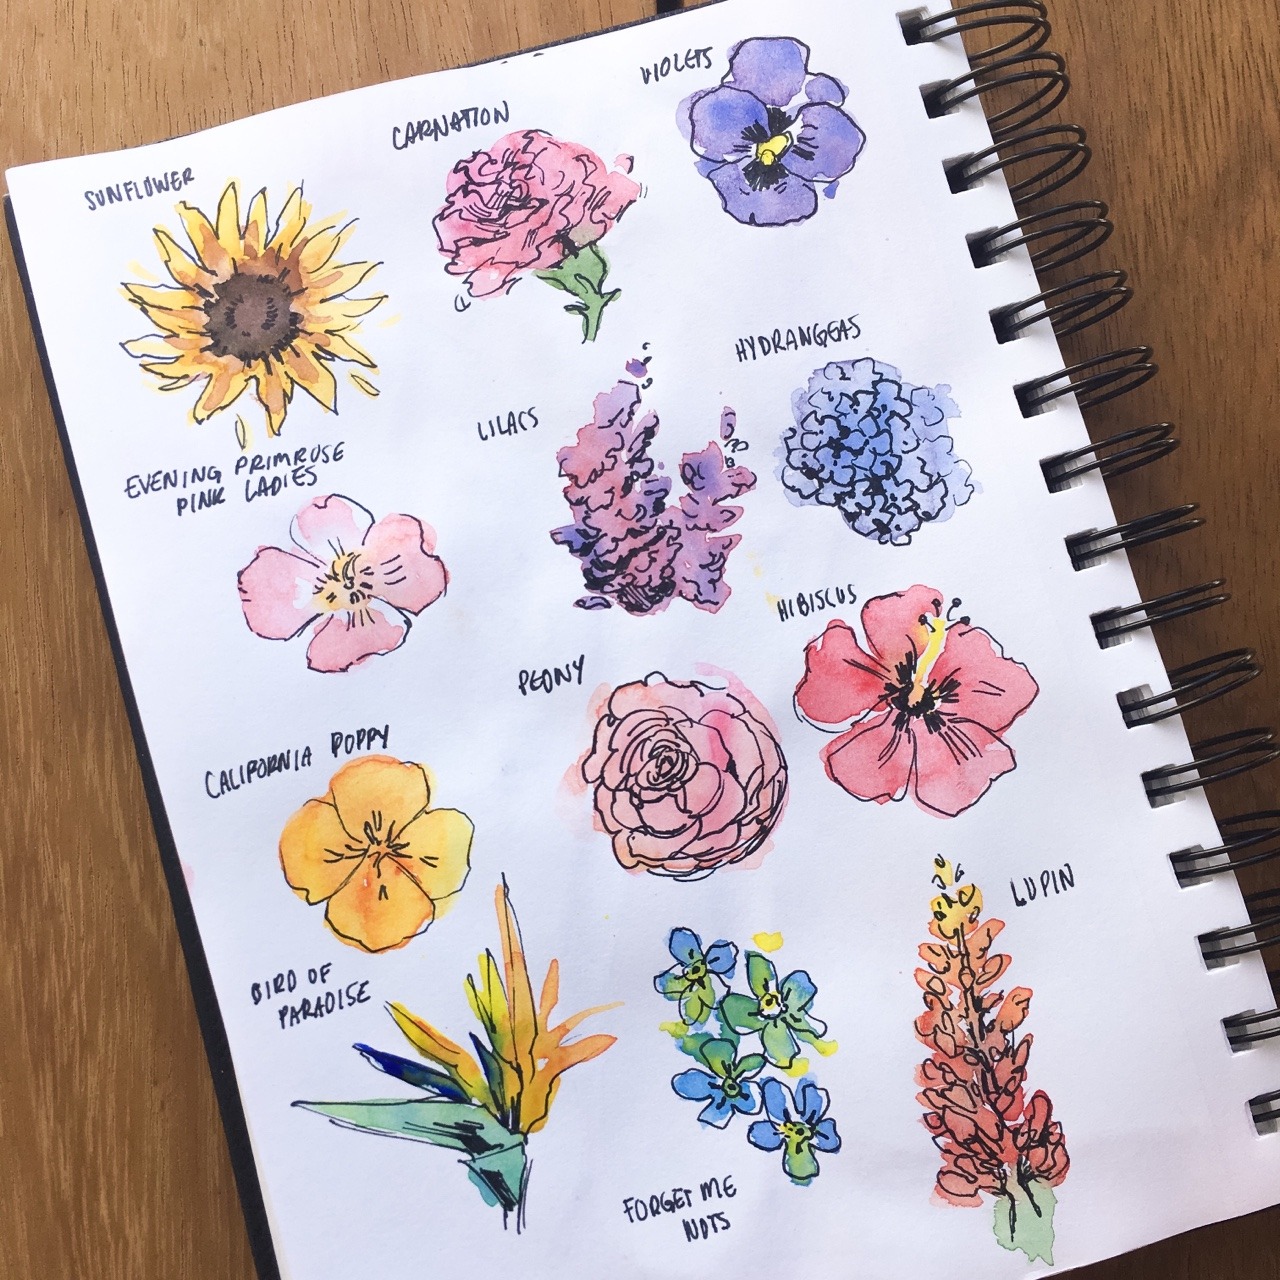 8-butt:
“Some flowers that you guys requested! It’s fun to experiment with watercolor even if I have no idea what I’m doing
”